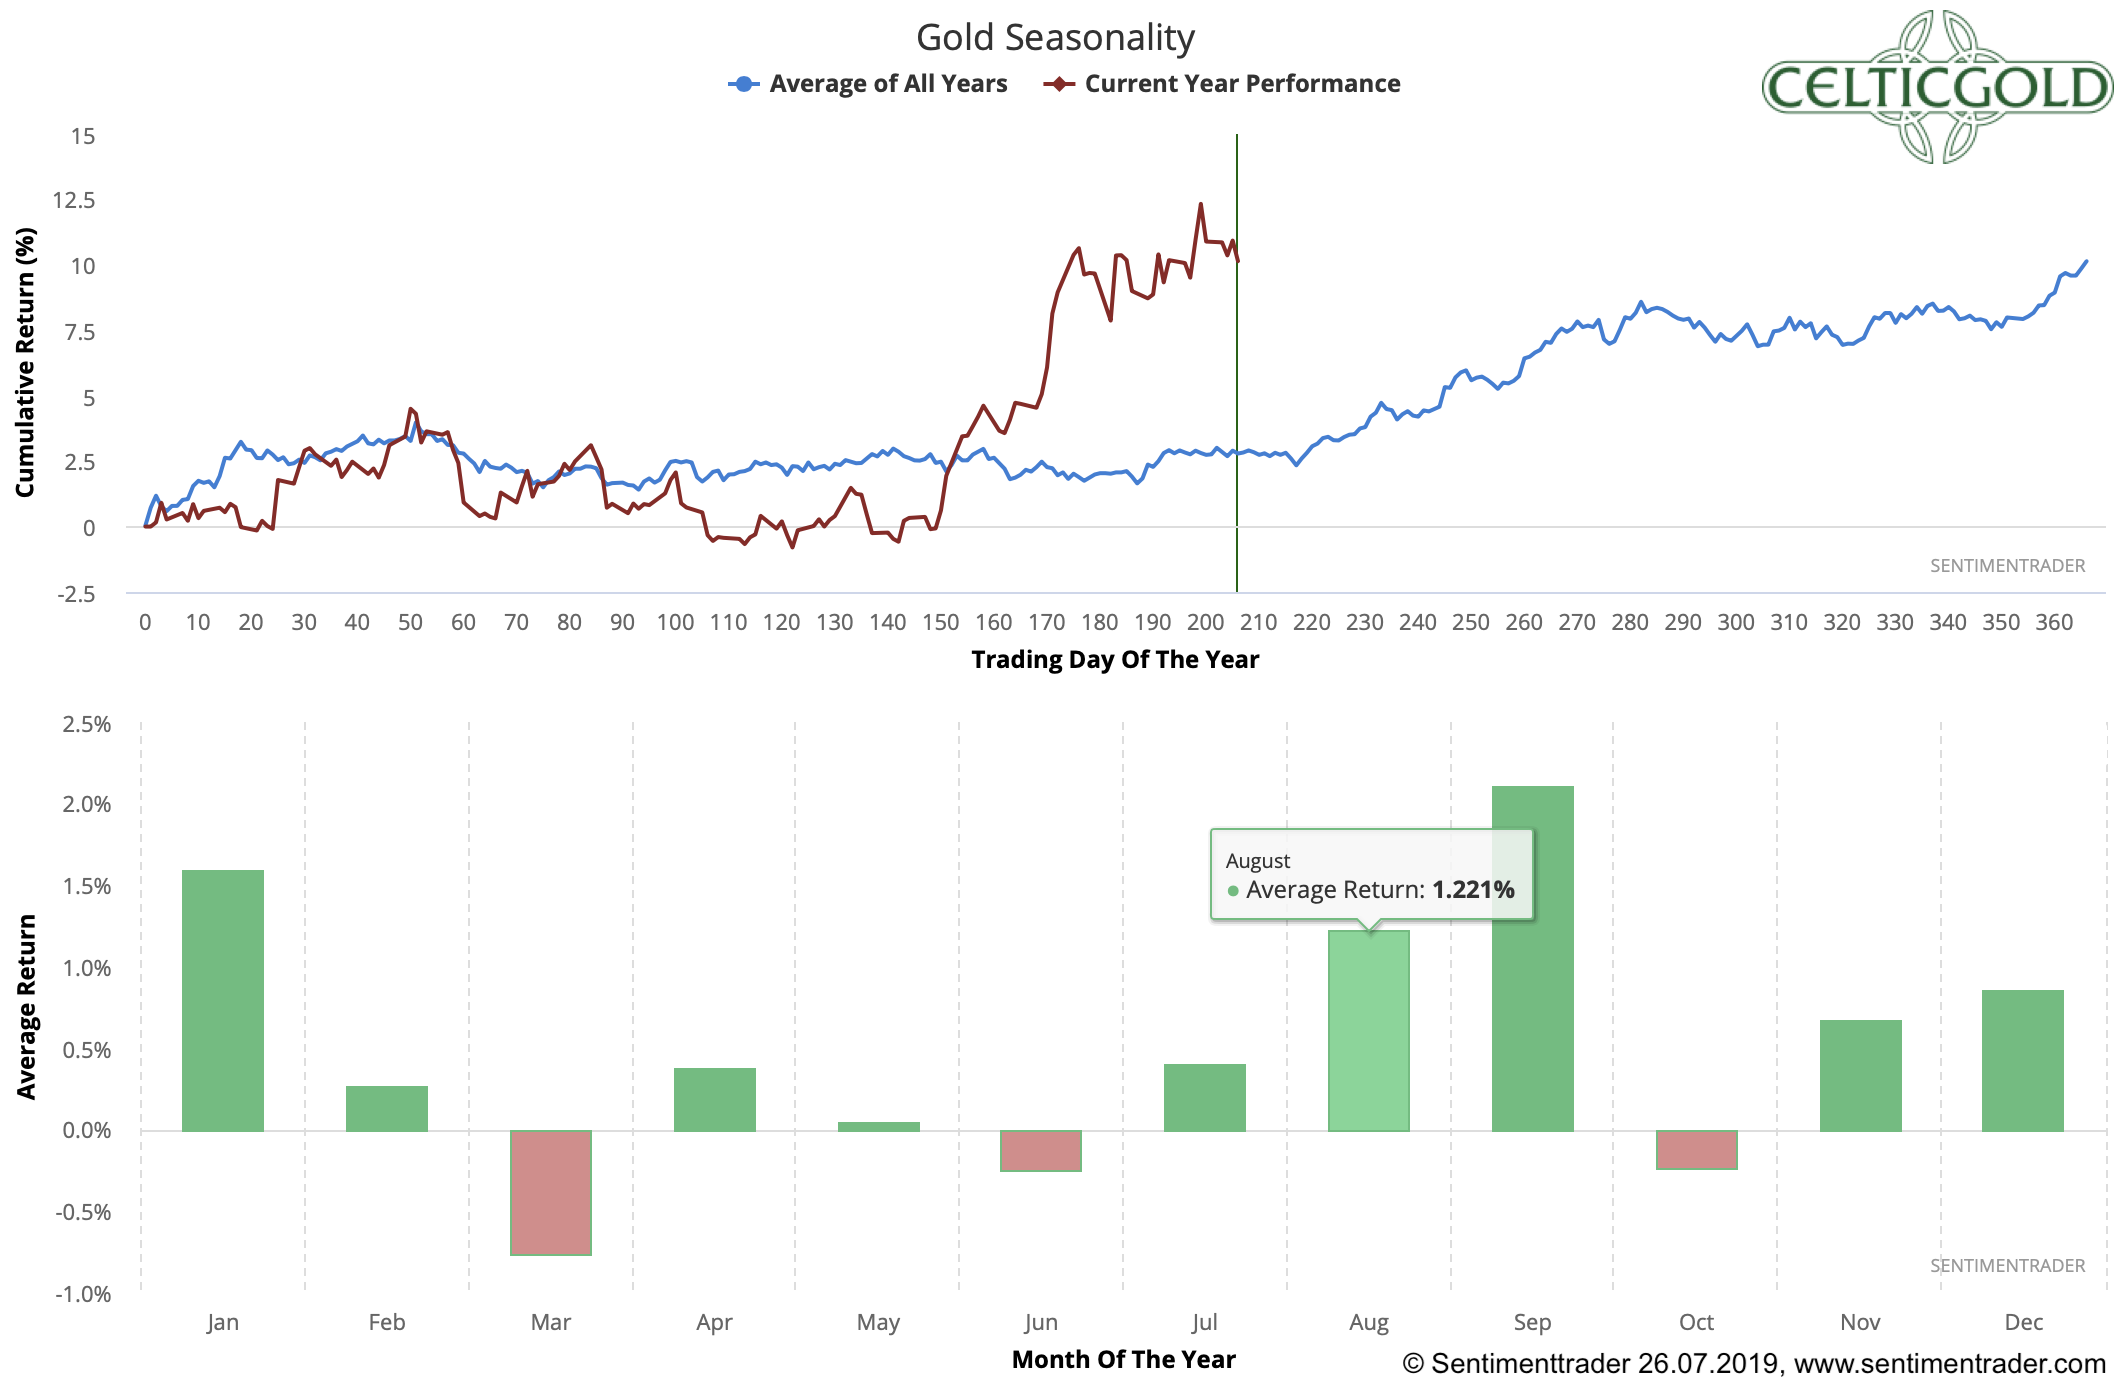 Seasonality for Gold as of July 26th, 2019. Source: Sentimentrader